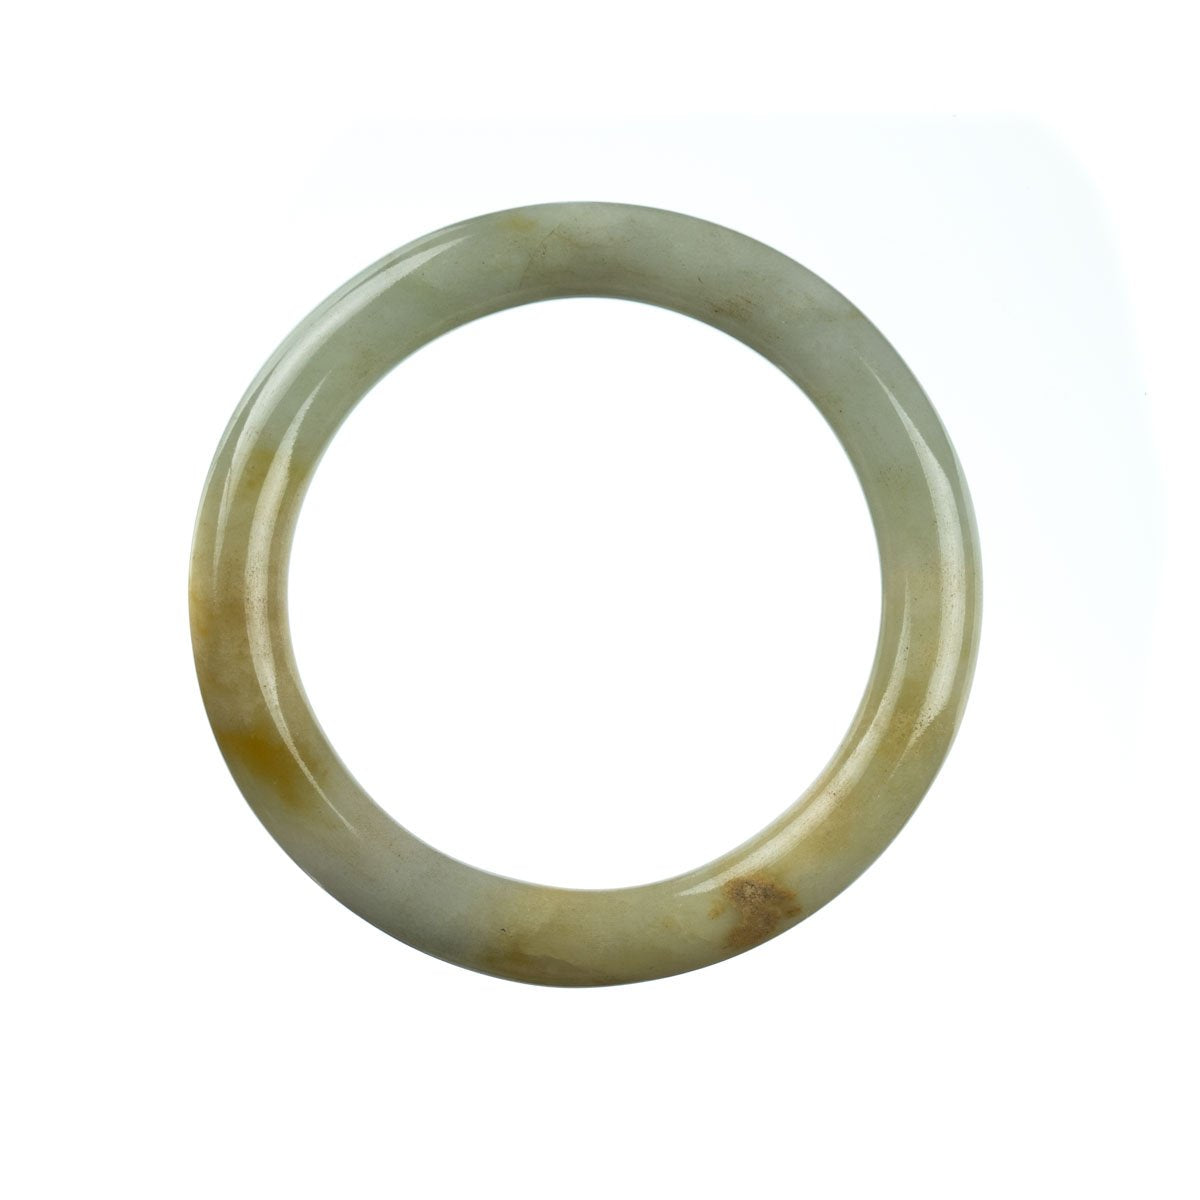 A close-up image of an authentic Grade A pale green Burmese jade bangle, measuring 57mm in diameter. The bangle has a smooth, rounded shape and is displayed on a white background.